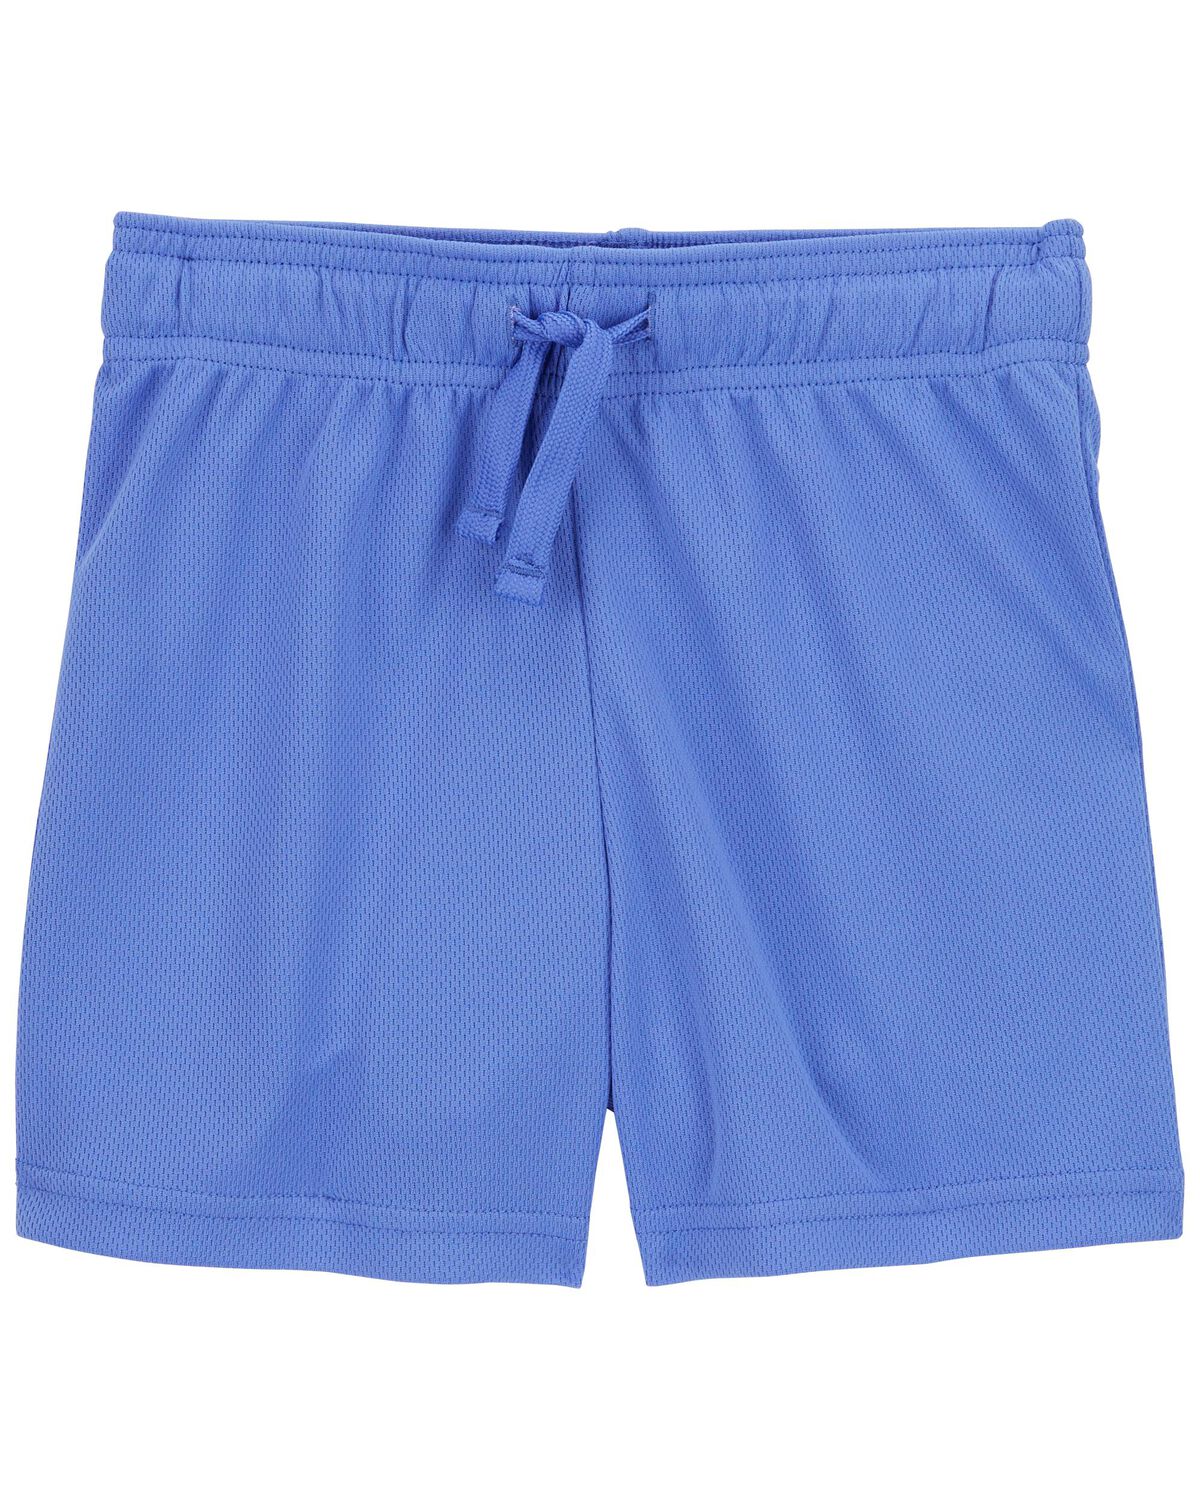 Blue Toddler Athletic Mesh Shorts | carters.com